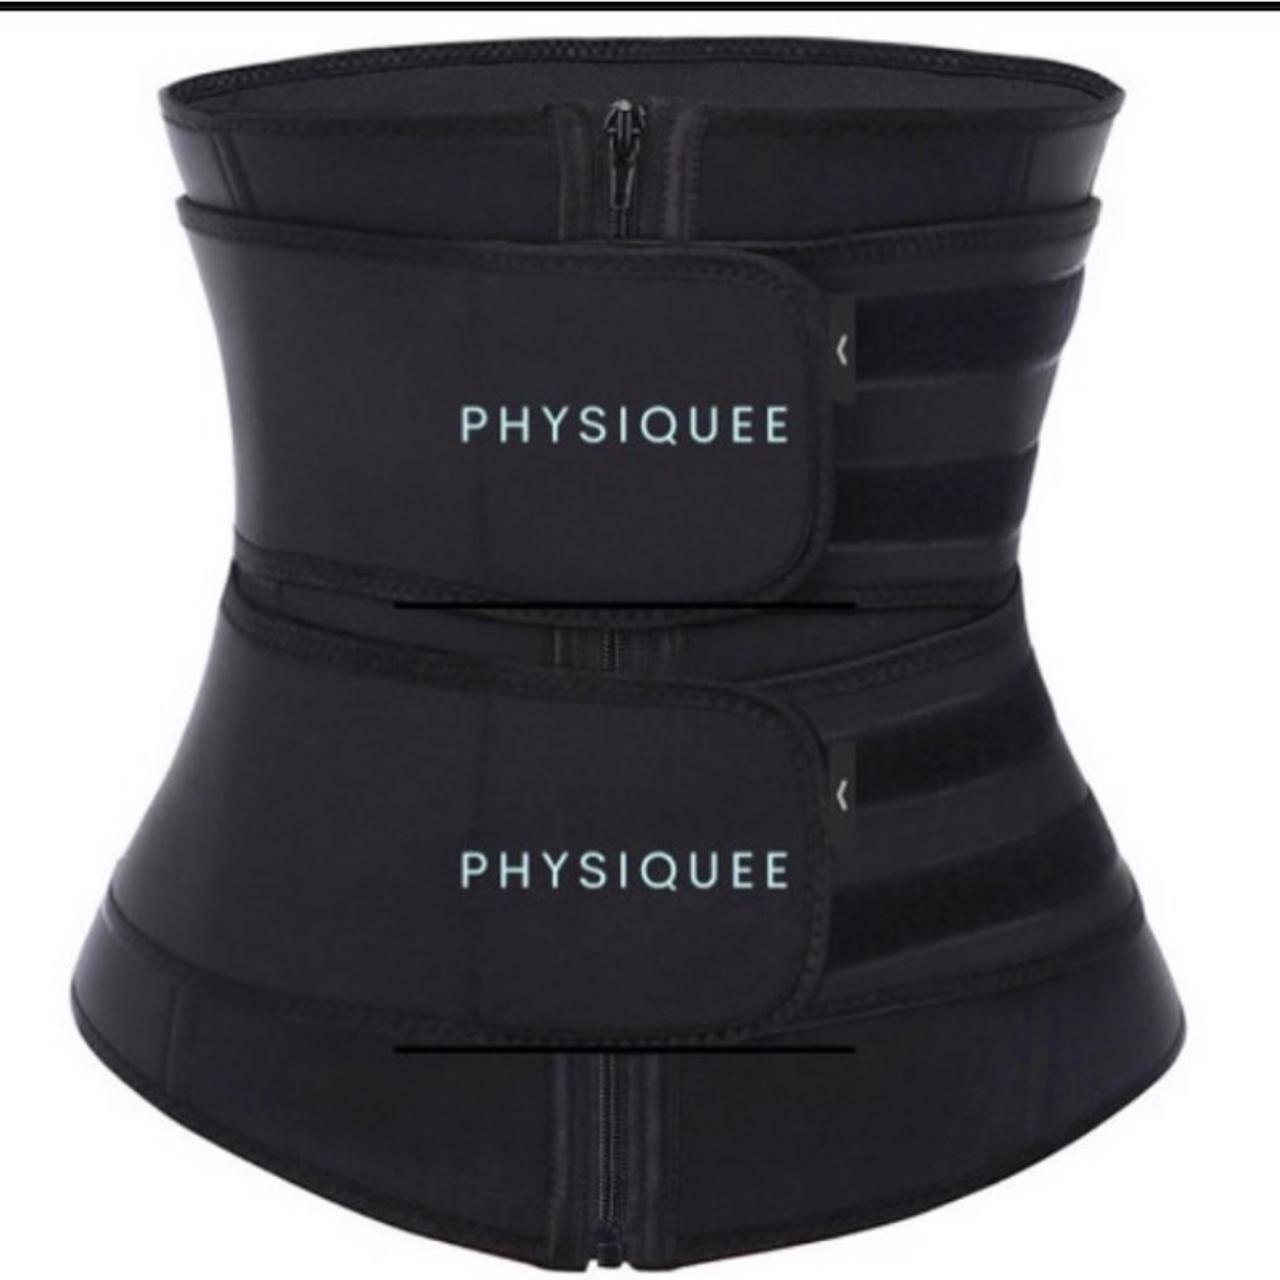 Brand new with tags maskateer waist trainer size - Depop